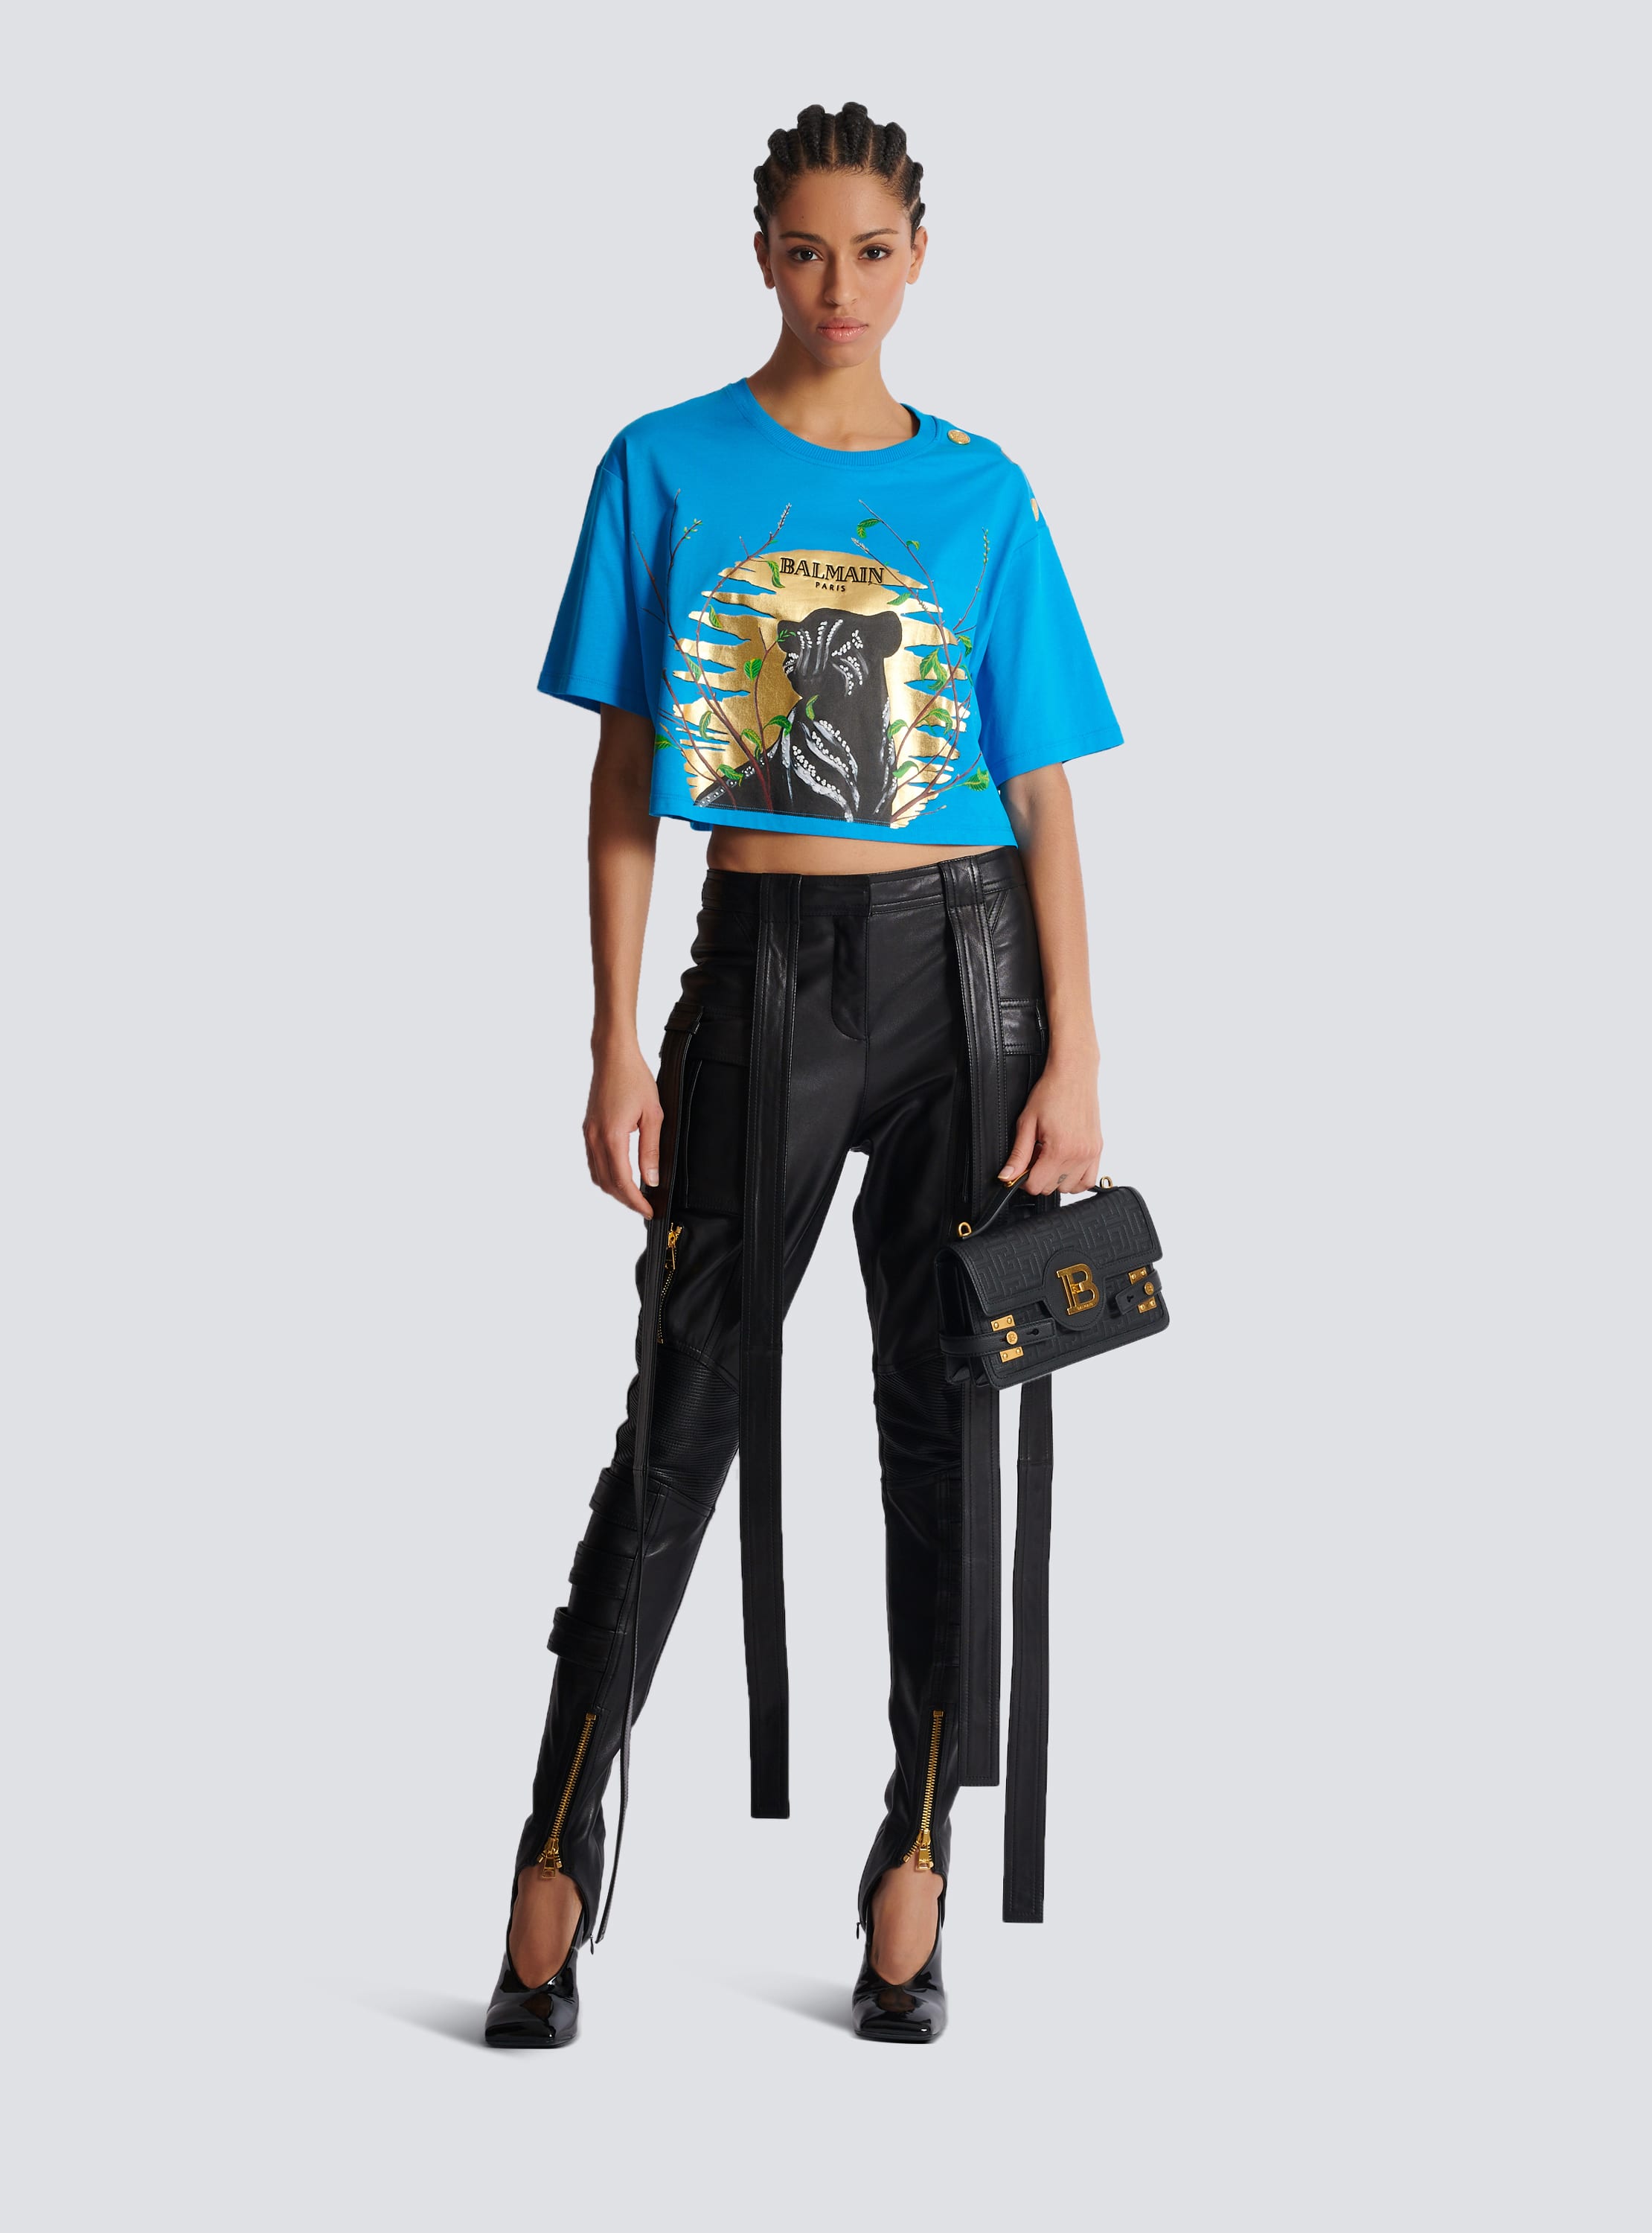 Leather cargo trousers with straps